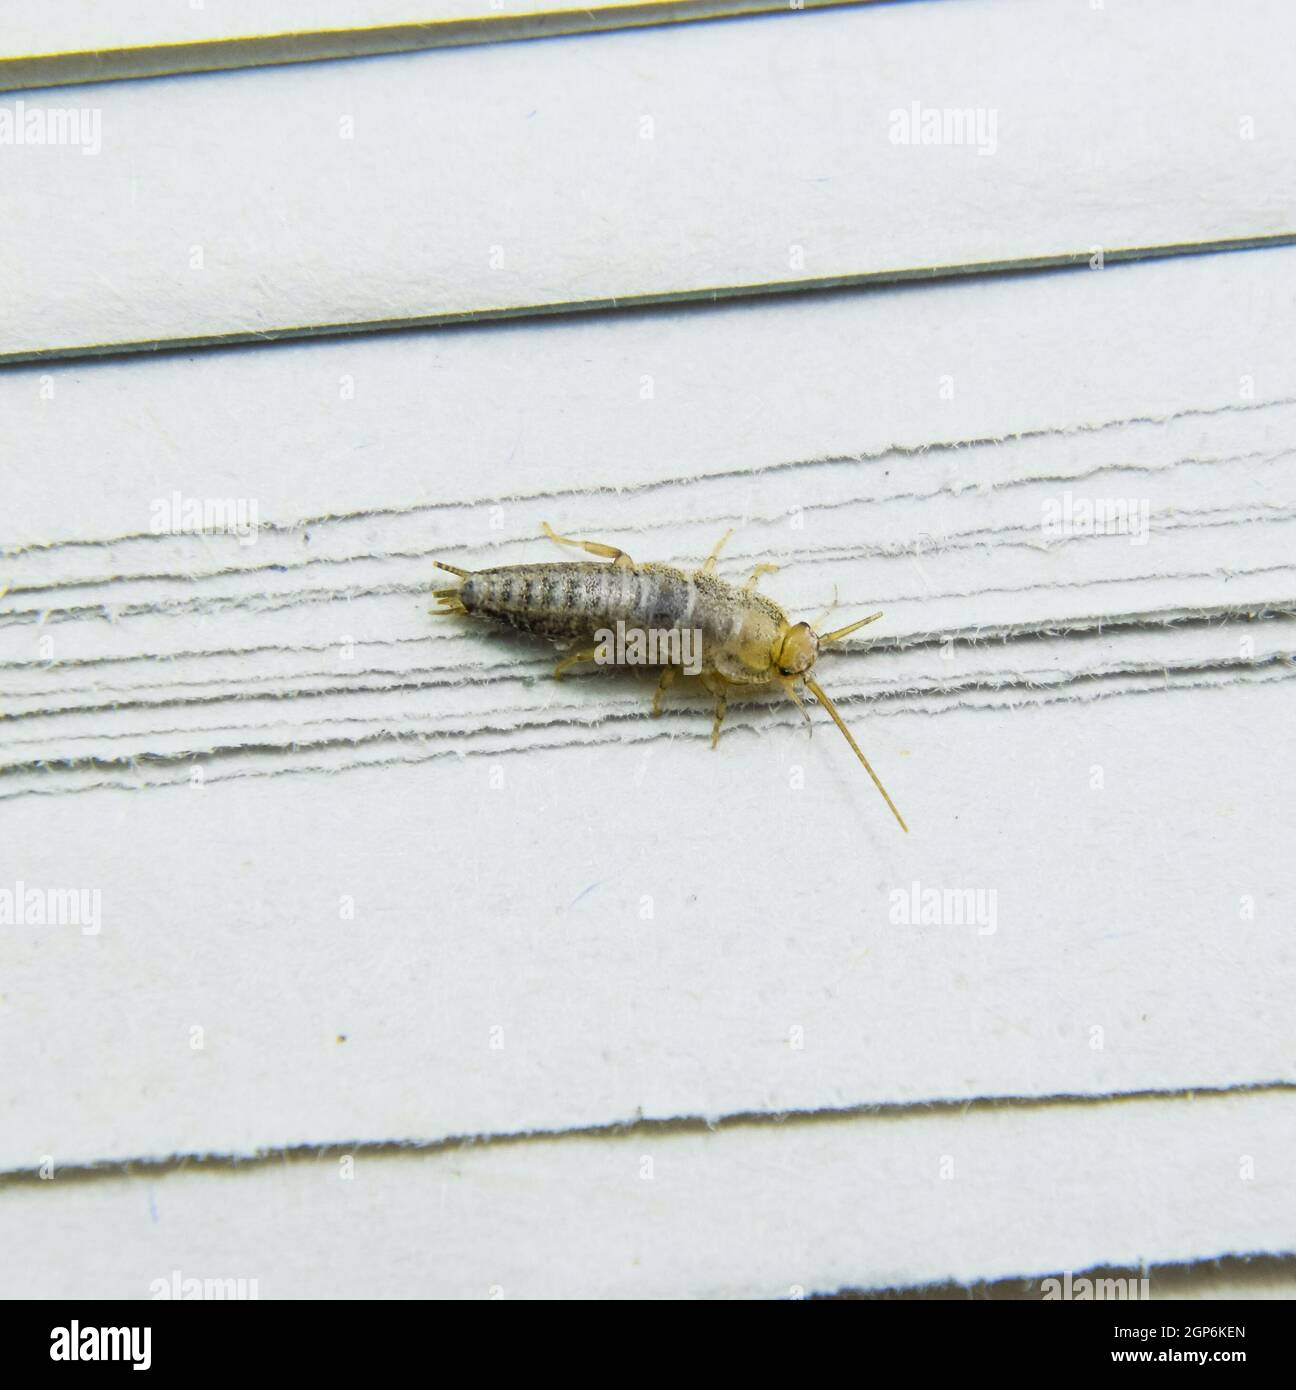 Insect feeding on paper - silverfish. Pest books and newspapers. Stock Photo